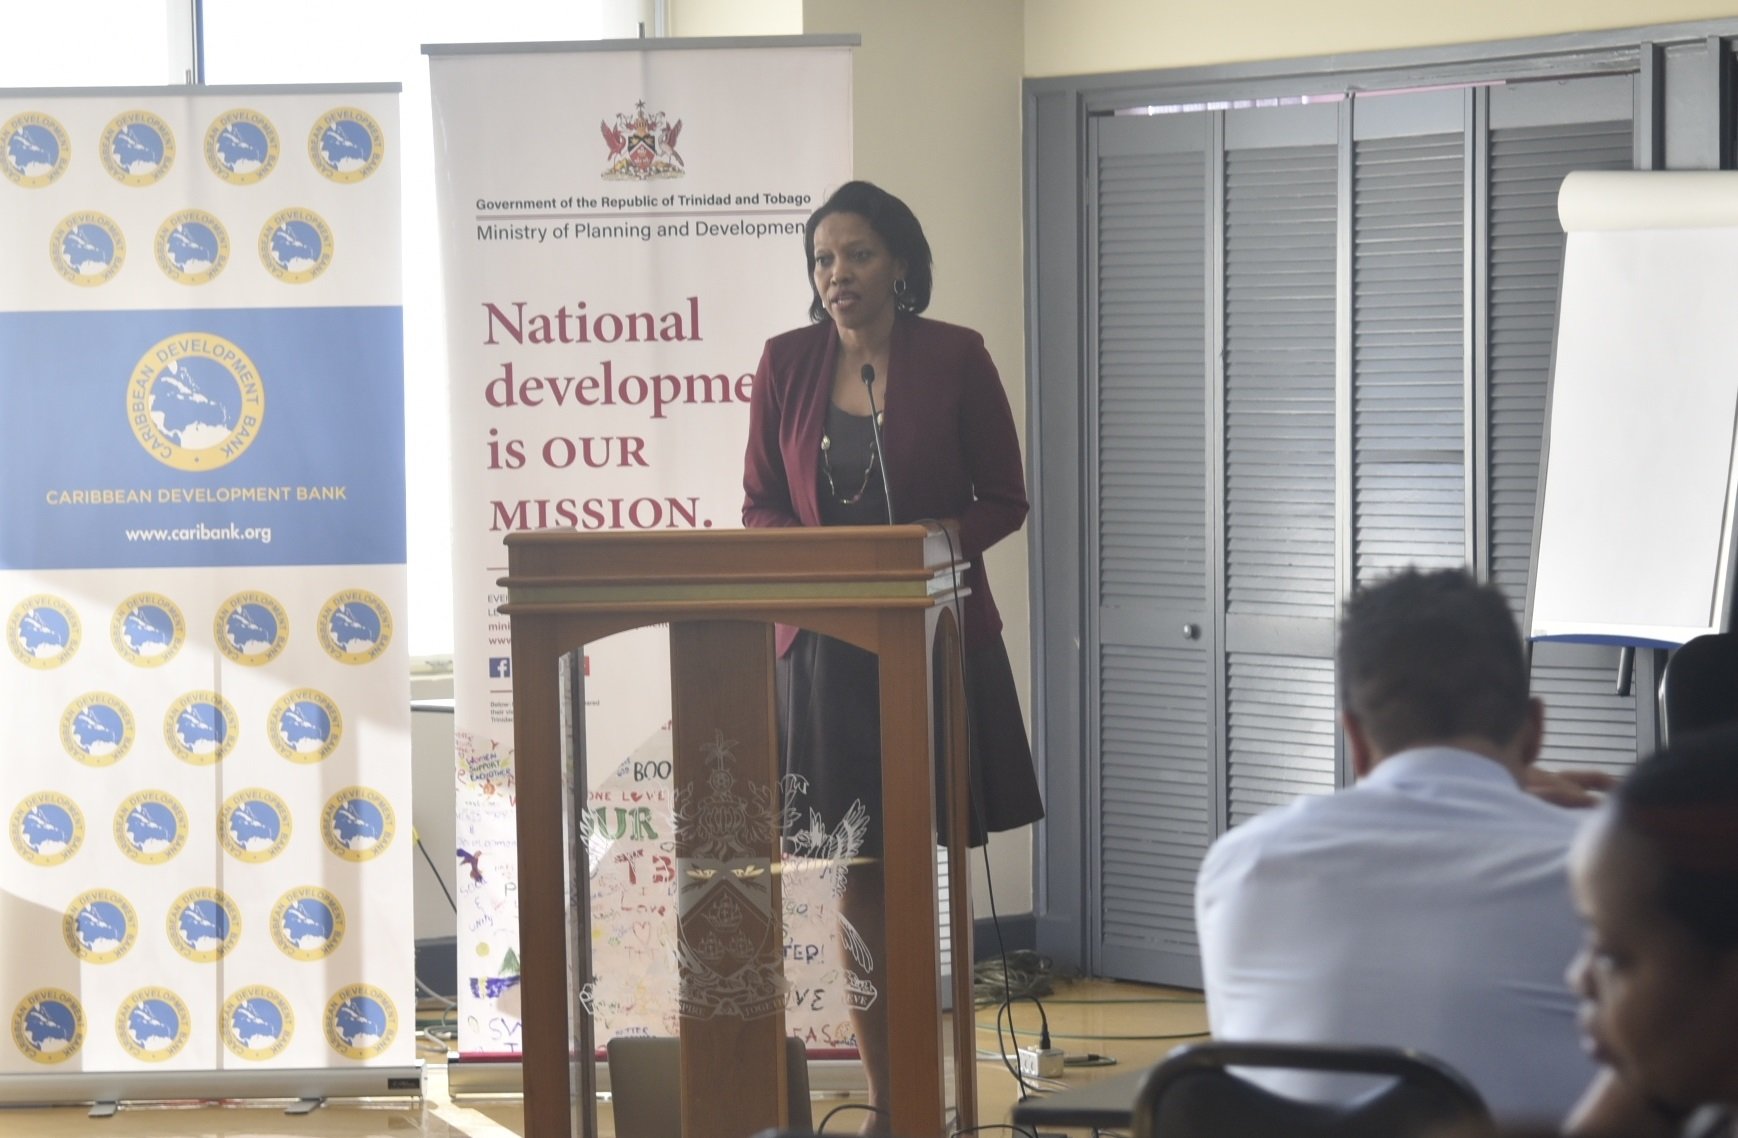 Darran Newman, Division Chief (Ag.), Technical Cooperation Division, CDB, believes PPAM/PCM training is integral to the Region’s ability to achieve the Sustainable Development Goals.